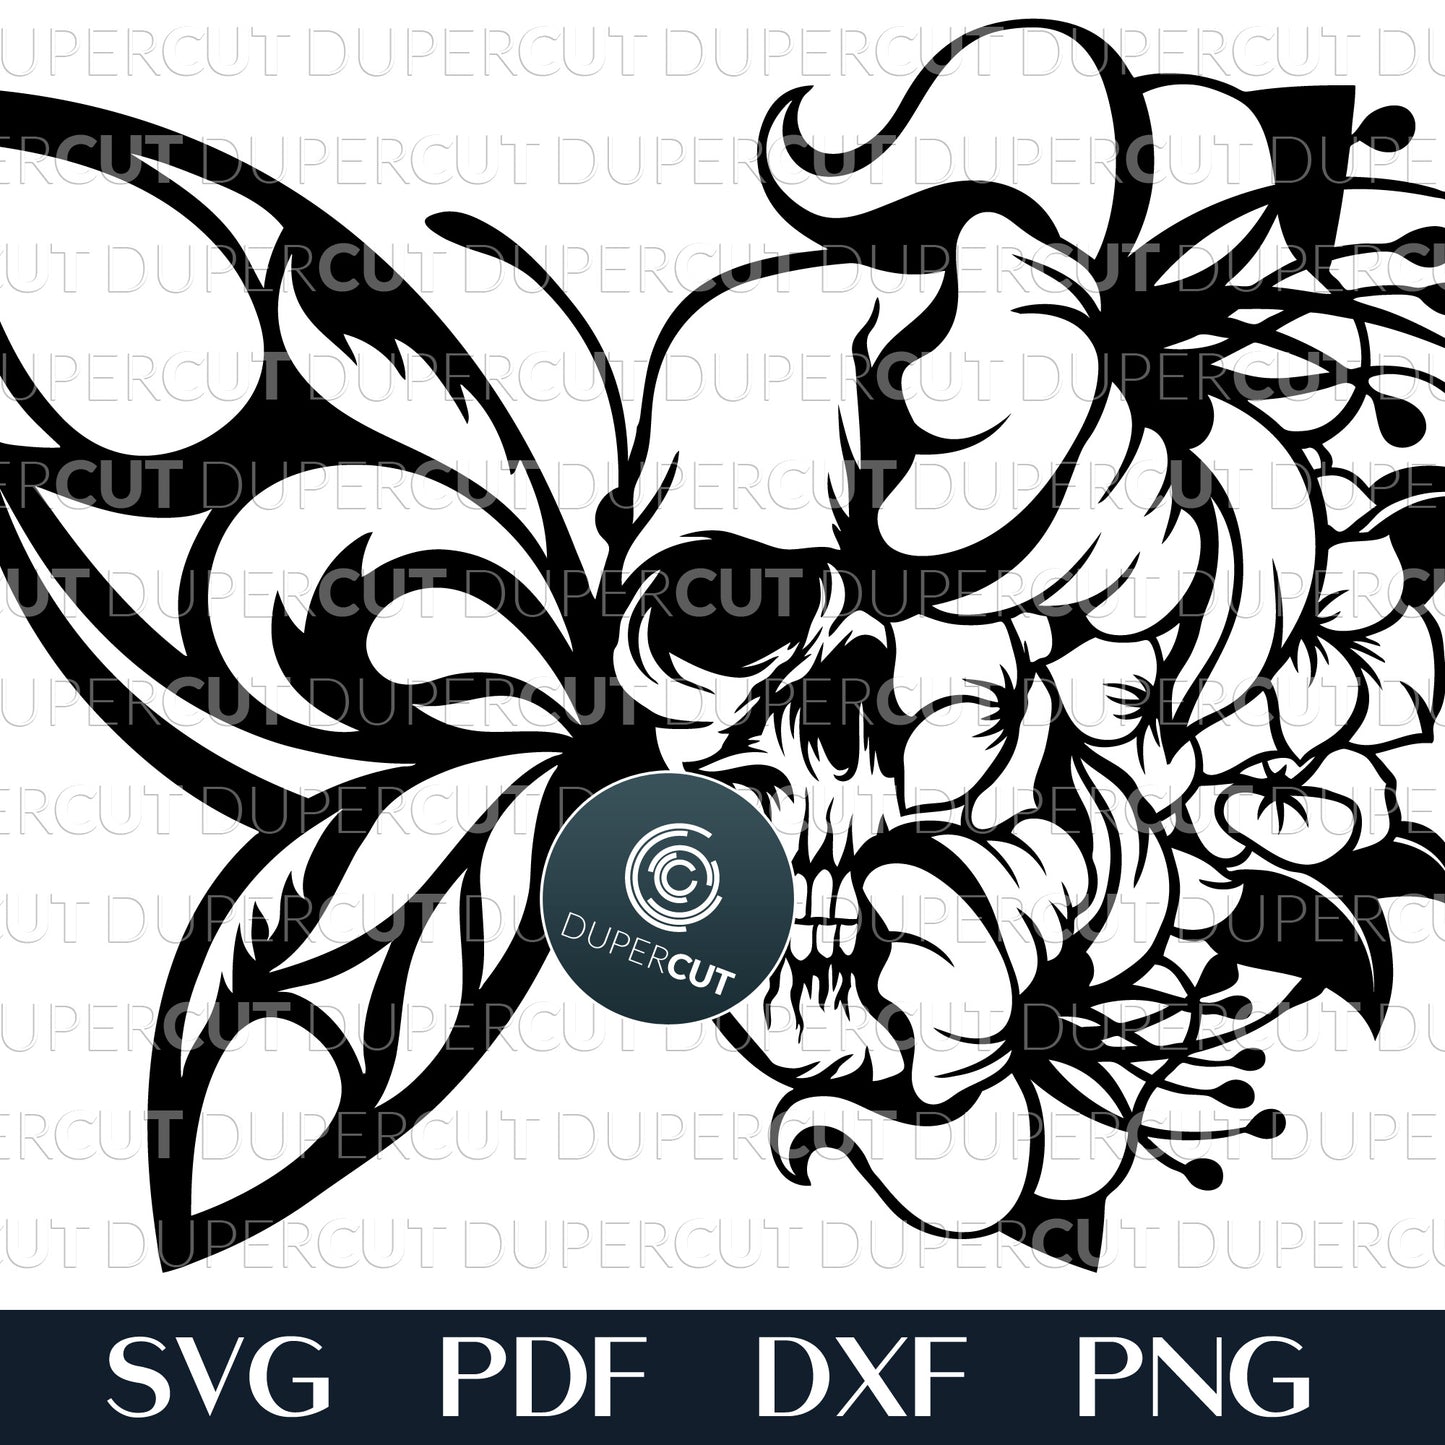 Steampunk floral Half butterfly with skull - SVG DXF PNG vector files for laser cutting and engraving. For use with Glowforge, Cricut, Silhouette, CNC plasma machines